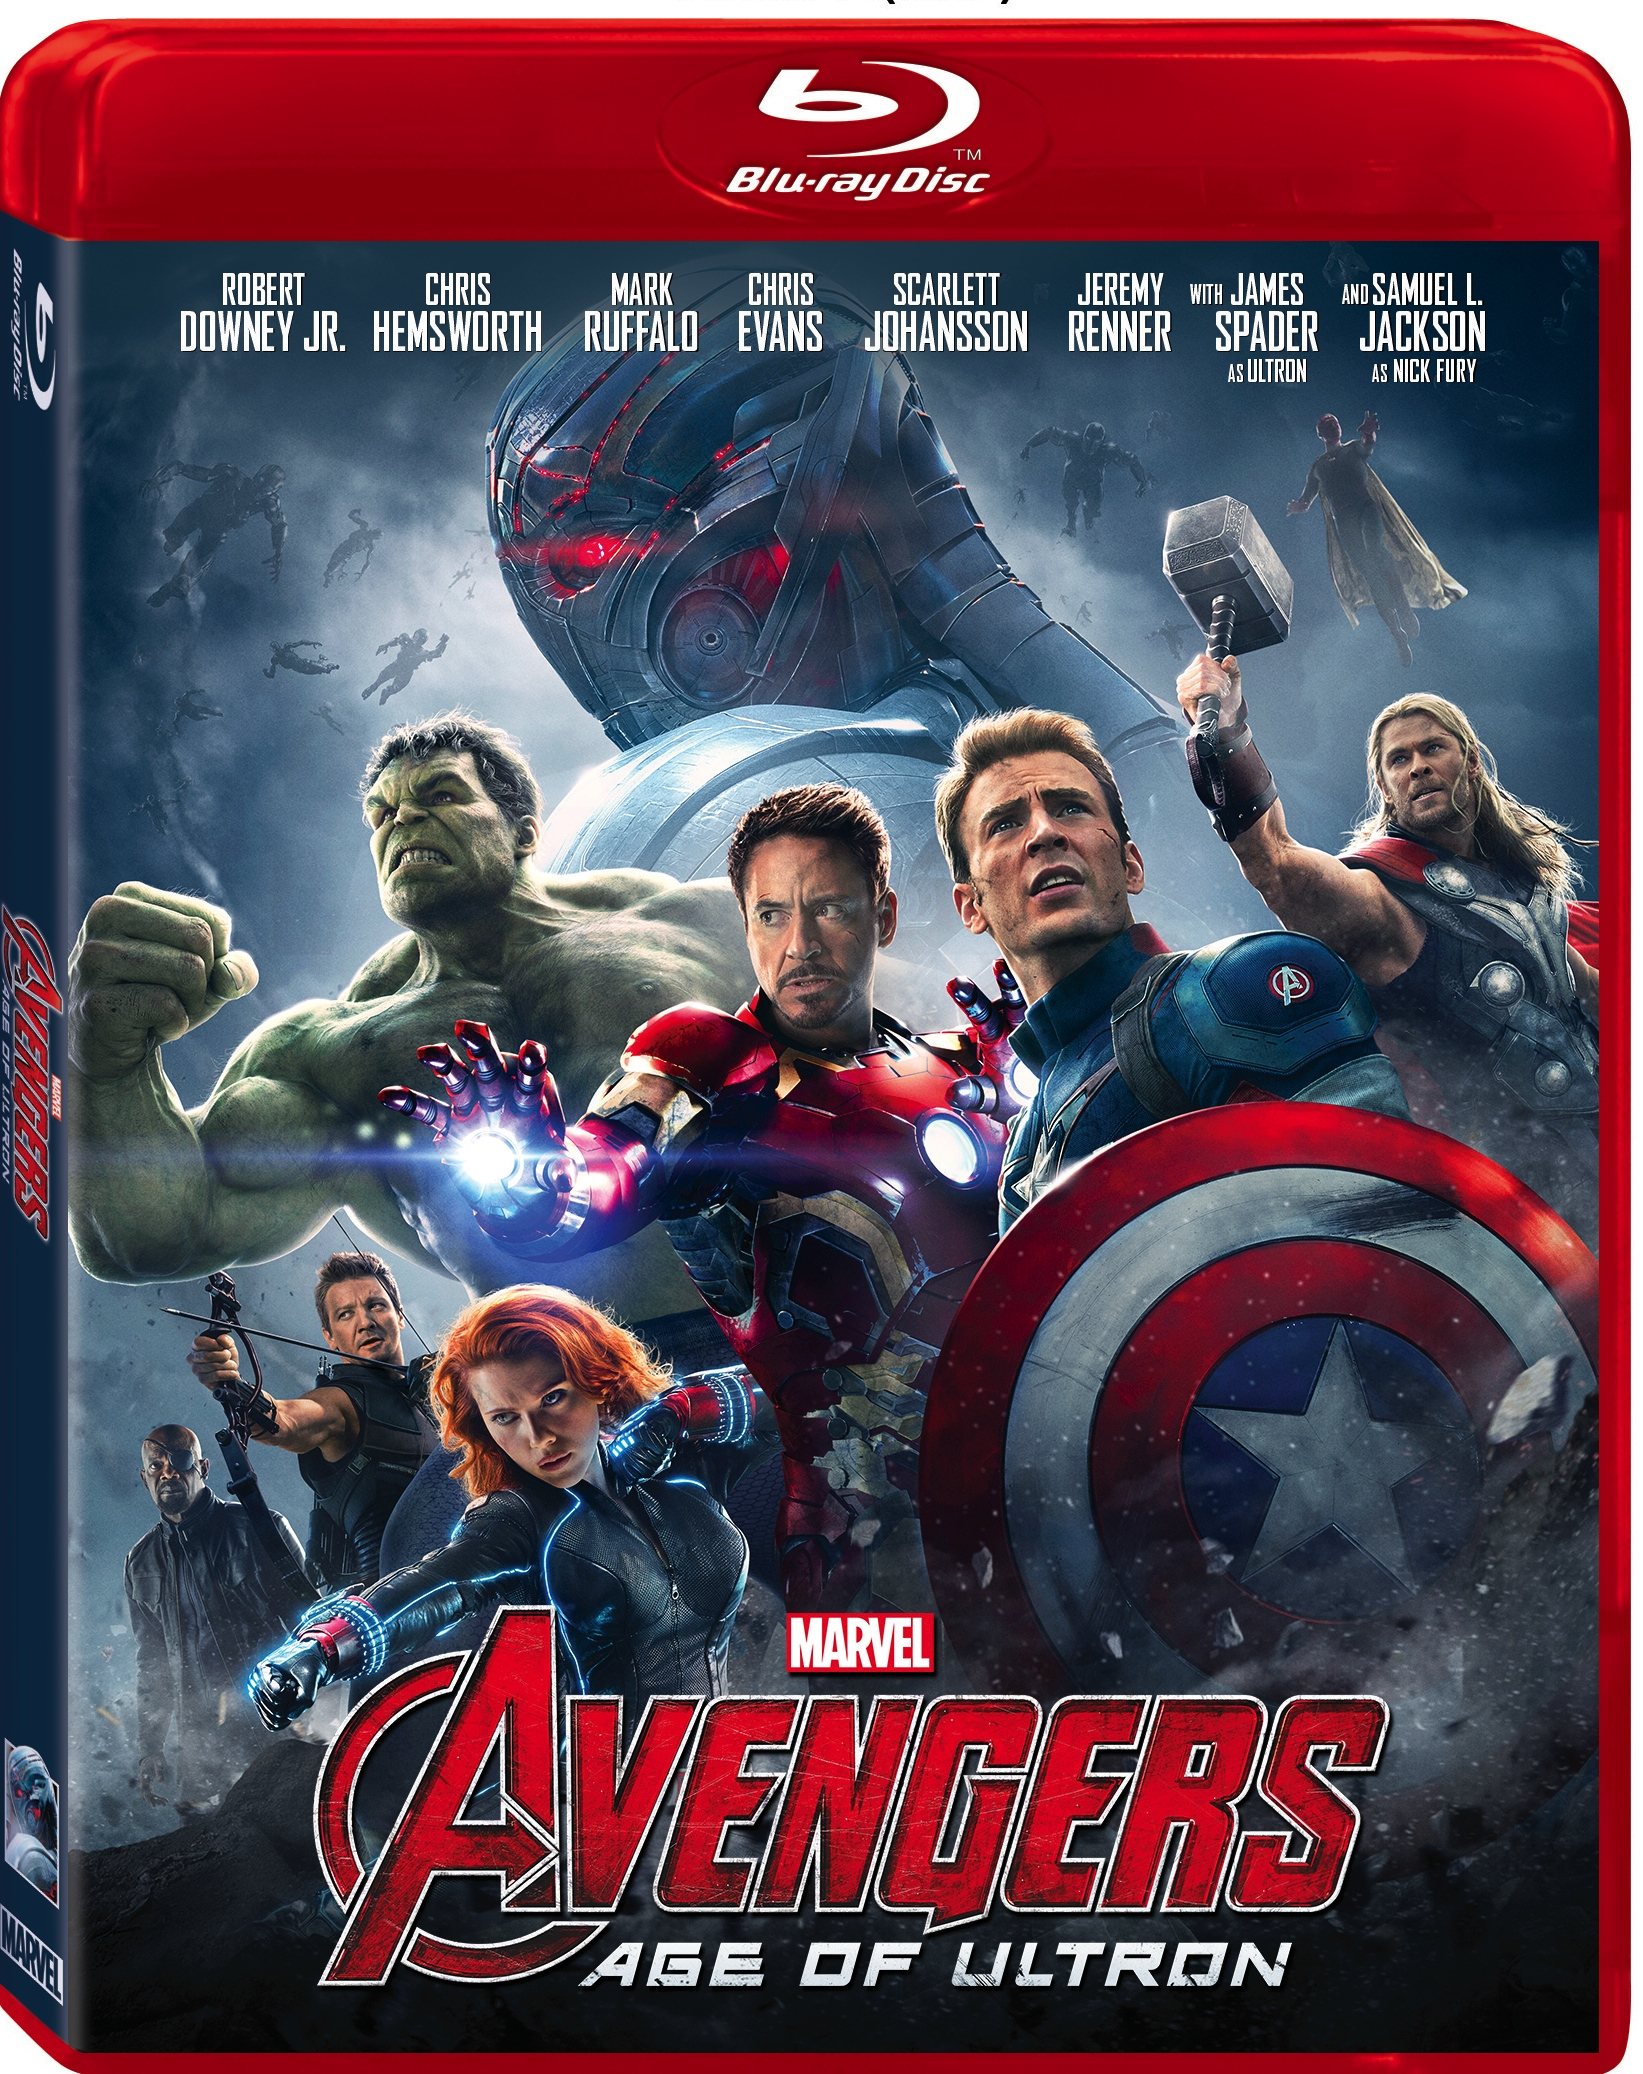 Marvel’s ‘Avengers: Age of Ultron’ Heading to Blu-ray 10/2